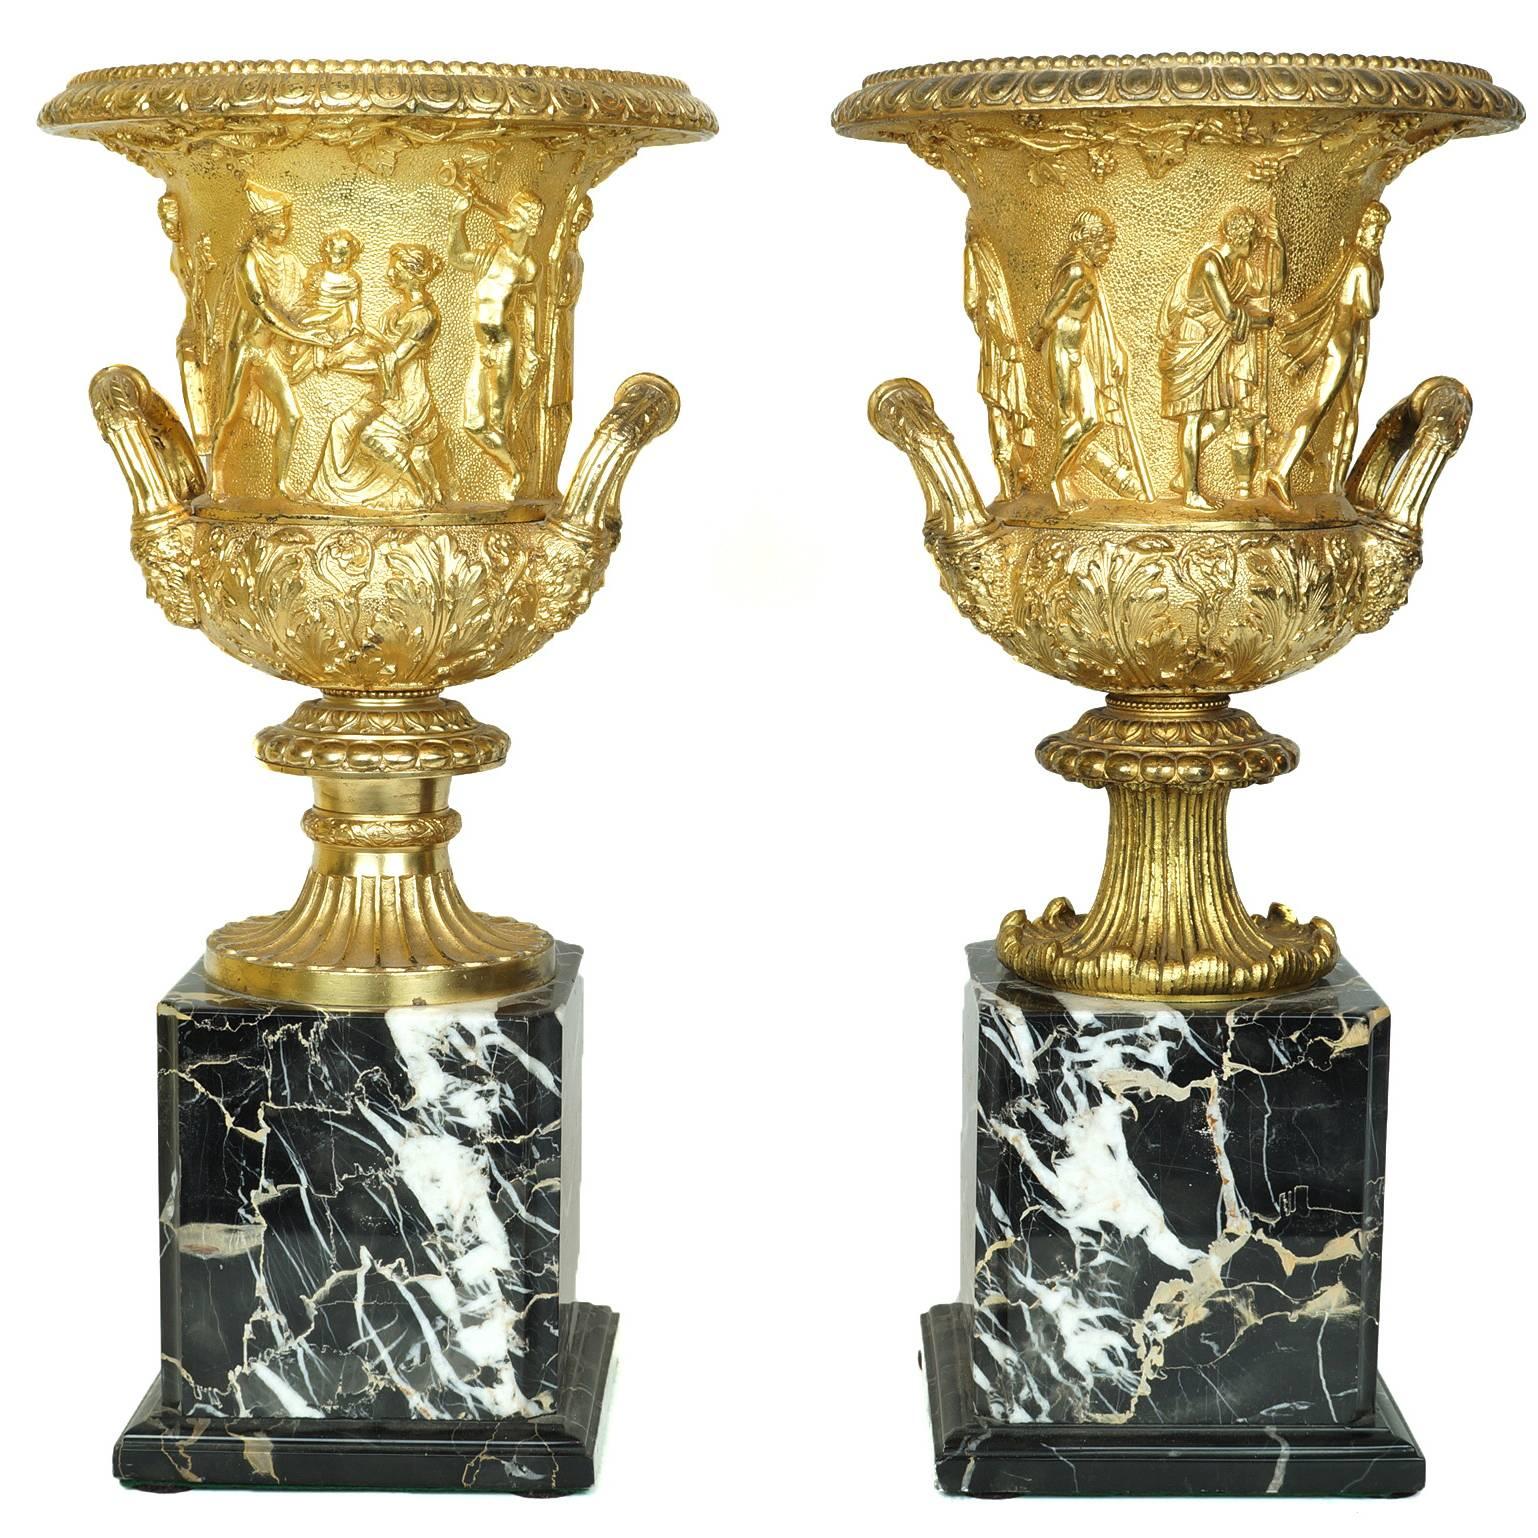 Pair of Neoclassical Gilt Bronze Figural Medici Style Urns on Marble Base 